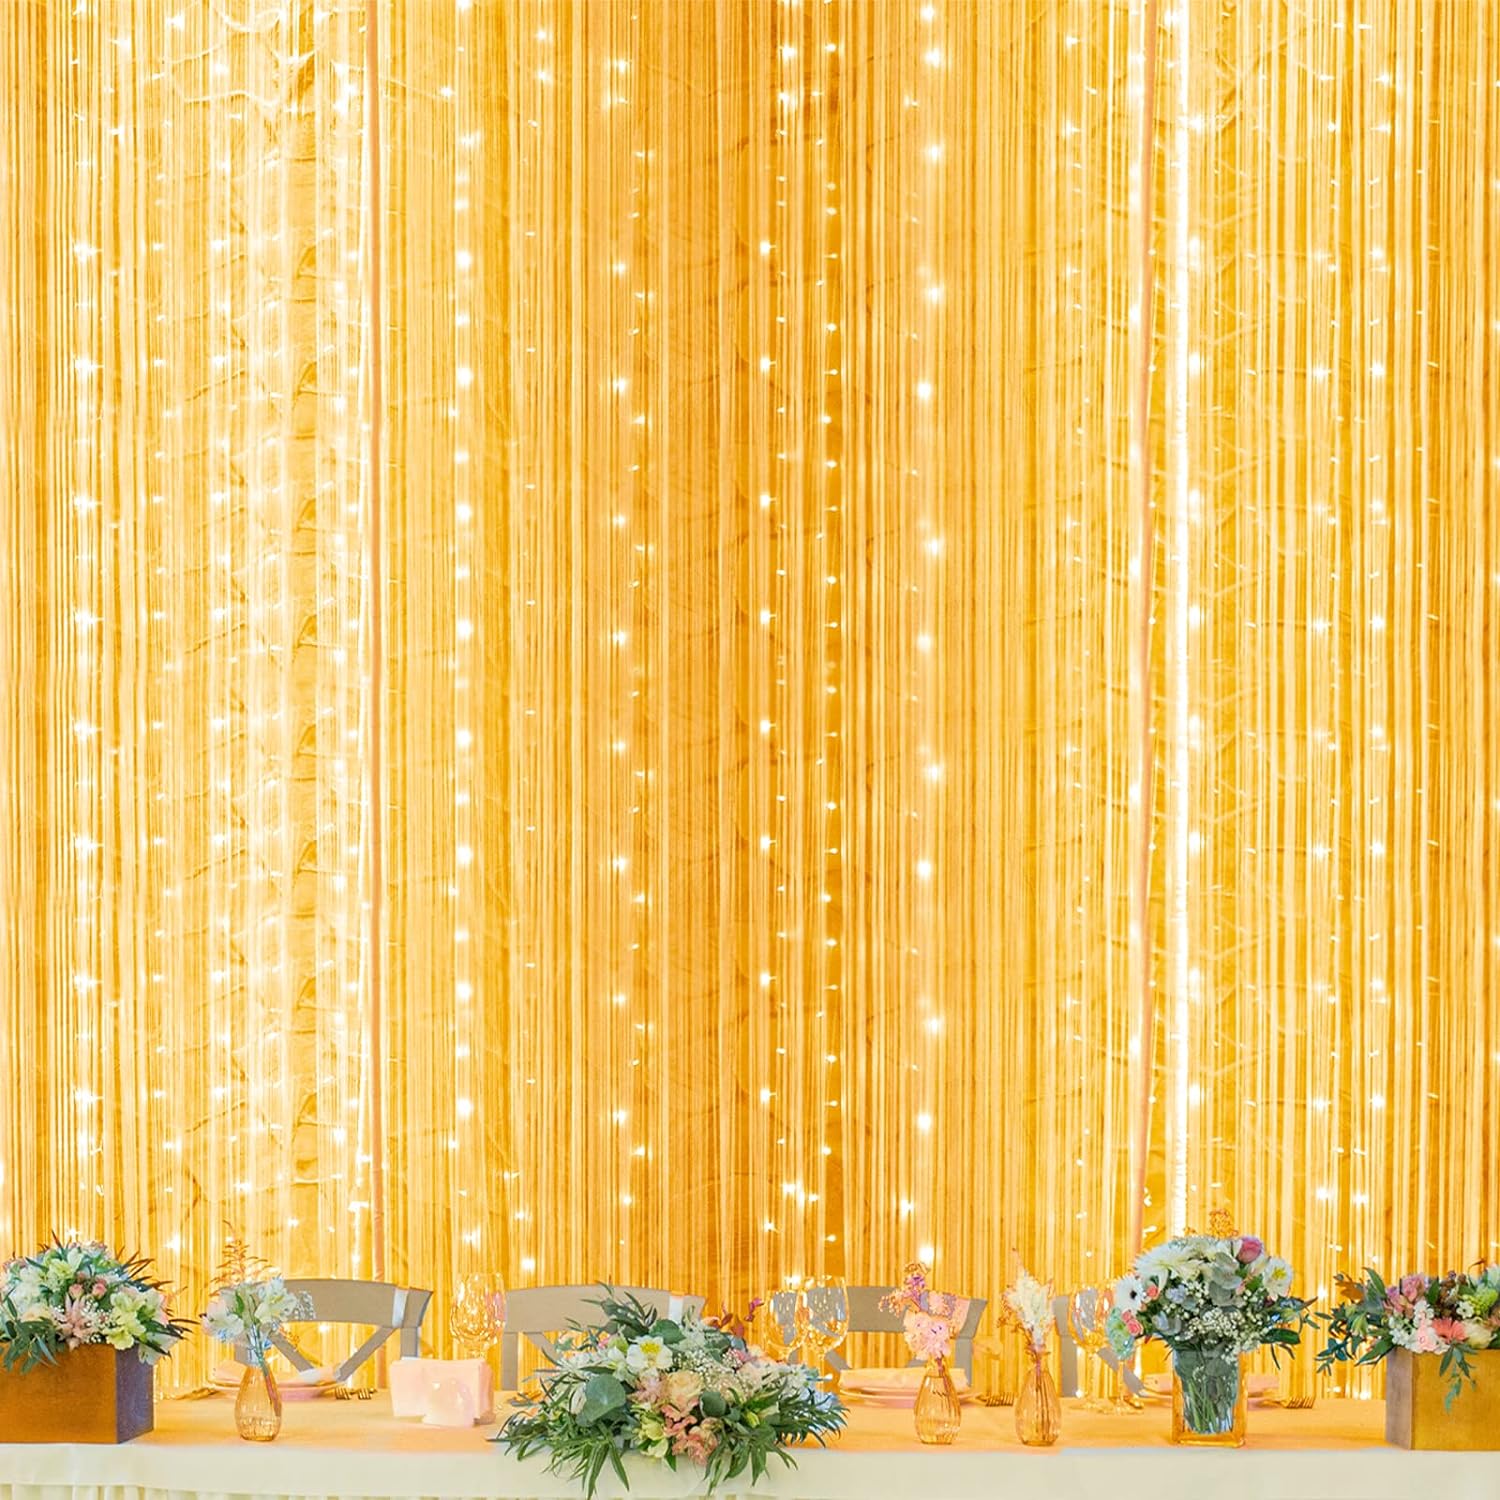 Twinkle Star 600 LED Window Curtain String Light for Wedding Party Home Garden Bedroom Outdoor Indoor Wall, Warm White